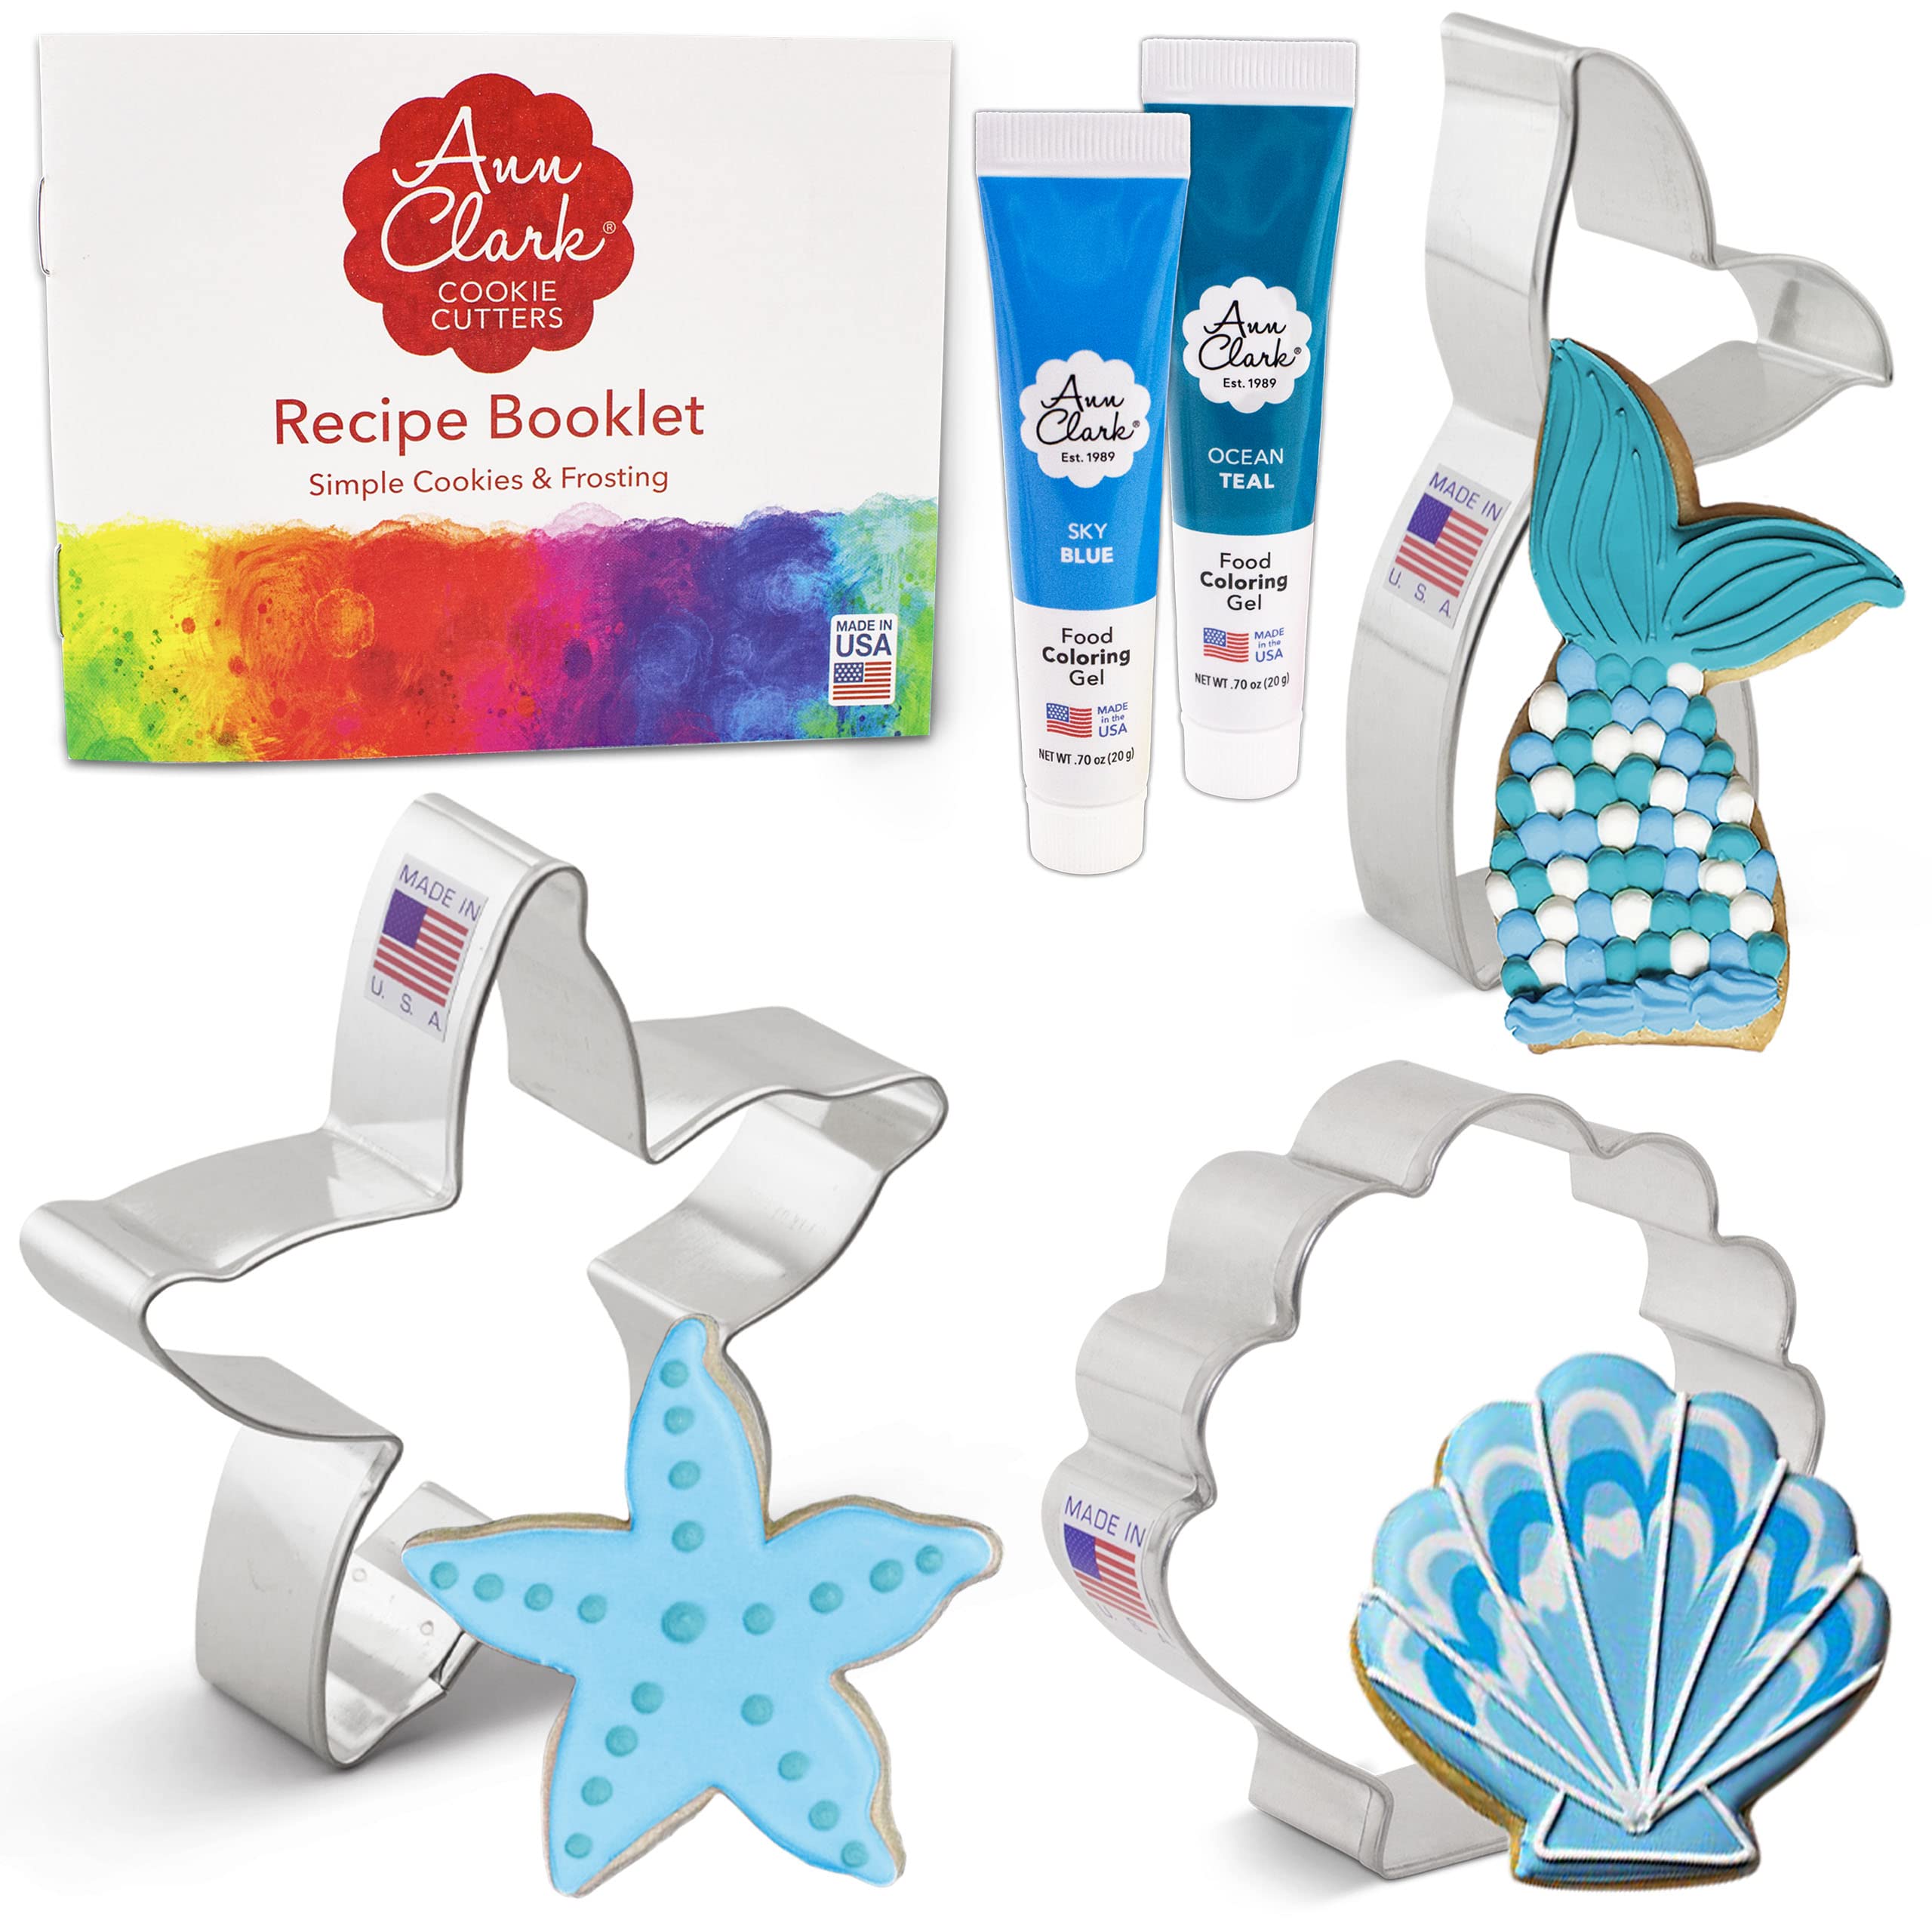 Mermaid Cookie Cutters and Decorating 5-Pc. Set Made in USA by Ann Clark, Starfish, Seashell, Mermaid Tail, Teal & Sky Blue Food Coloring Gel